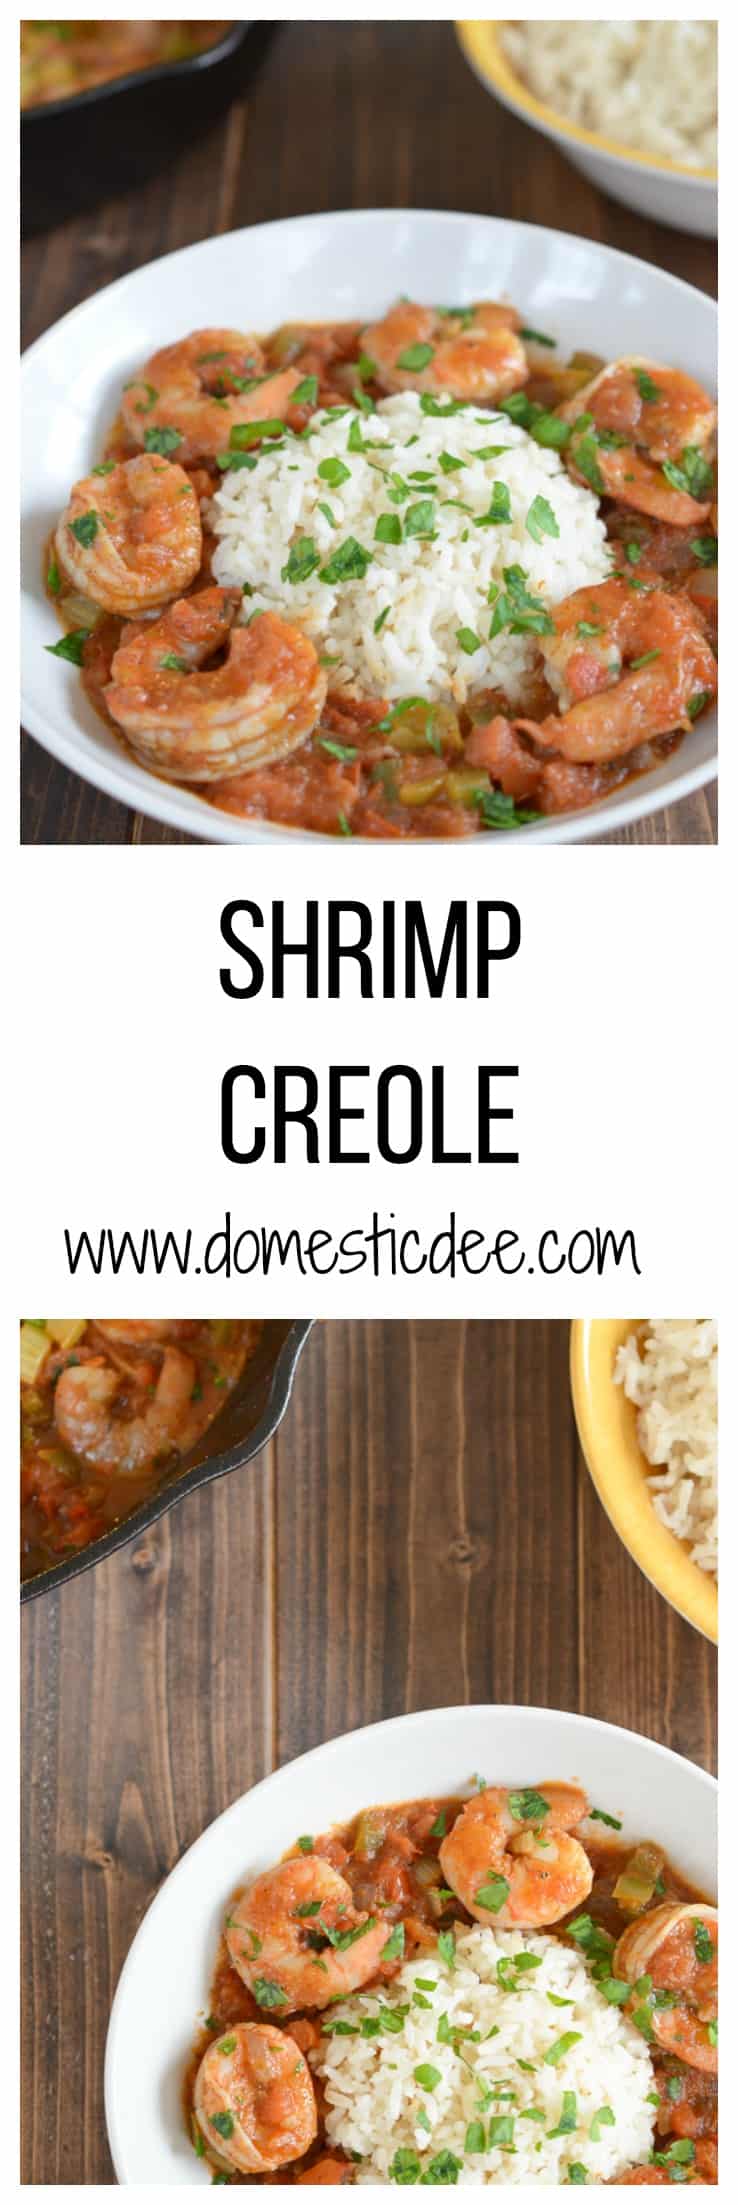 Easy Shrimp Creole Recipe- This easy shrimp creole recipe has jumbo shrimp, simmered in creole tomato sauce served over a steamy bed of rice. I www.domesticdee.com